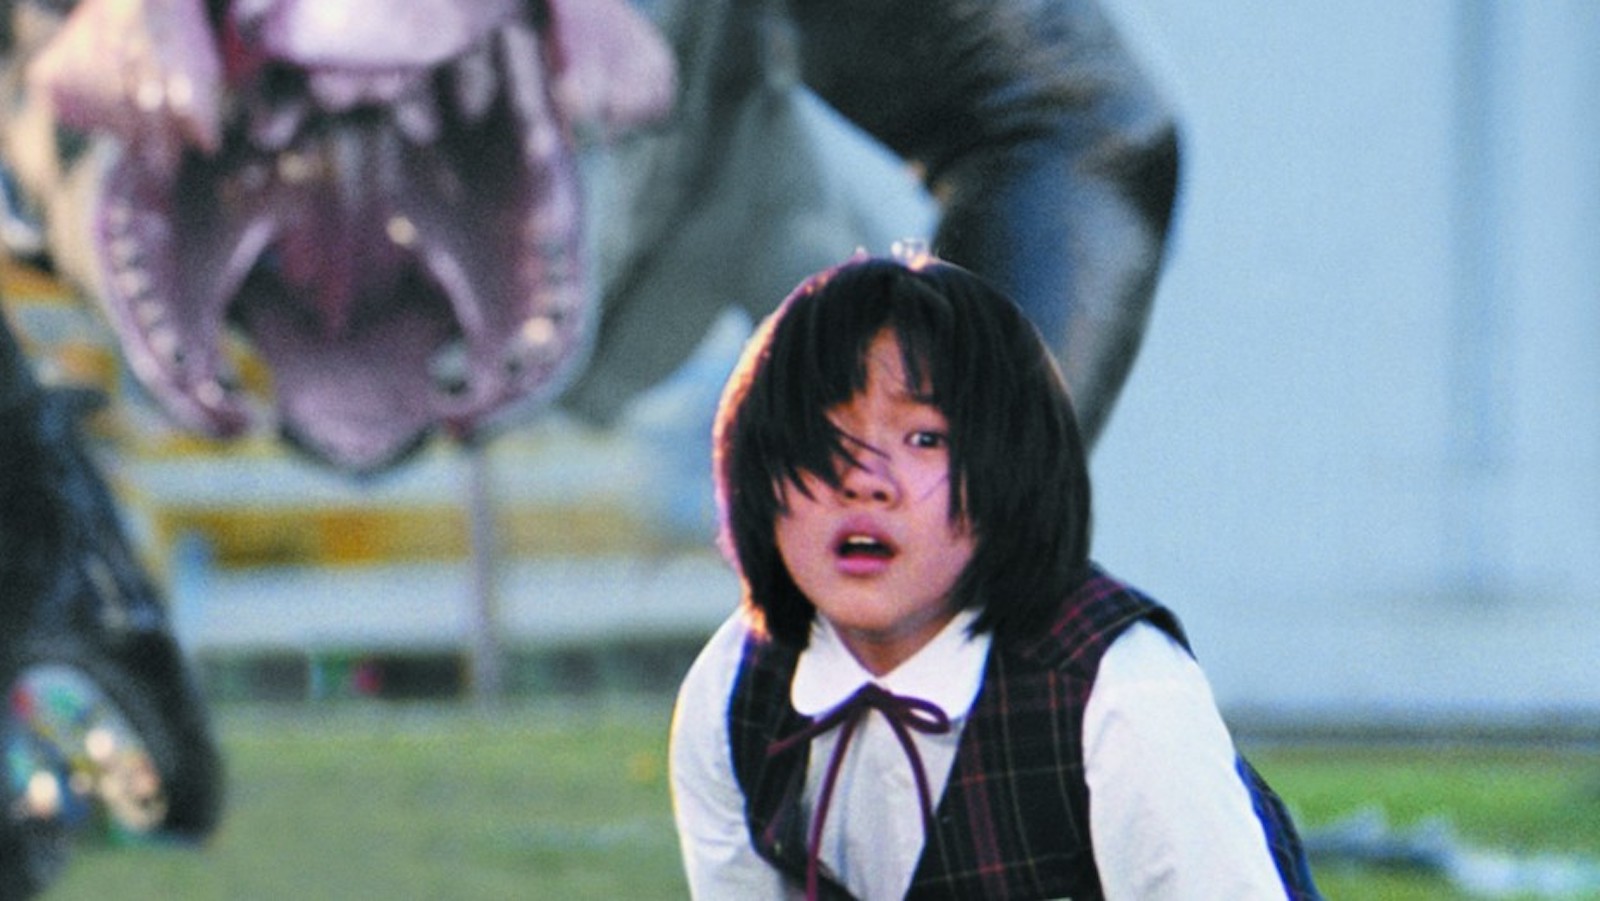 A young girl in a school uniform crouches while a monster menaces in the background